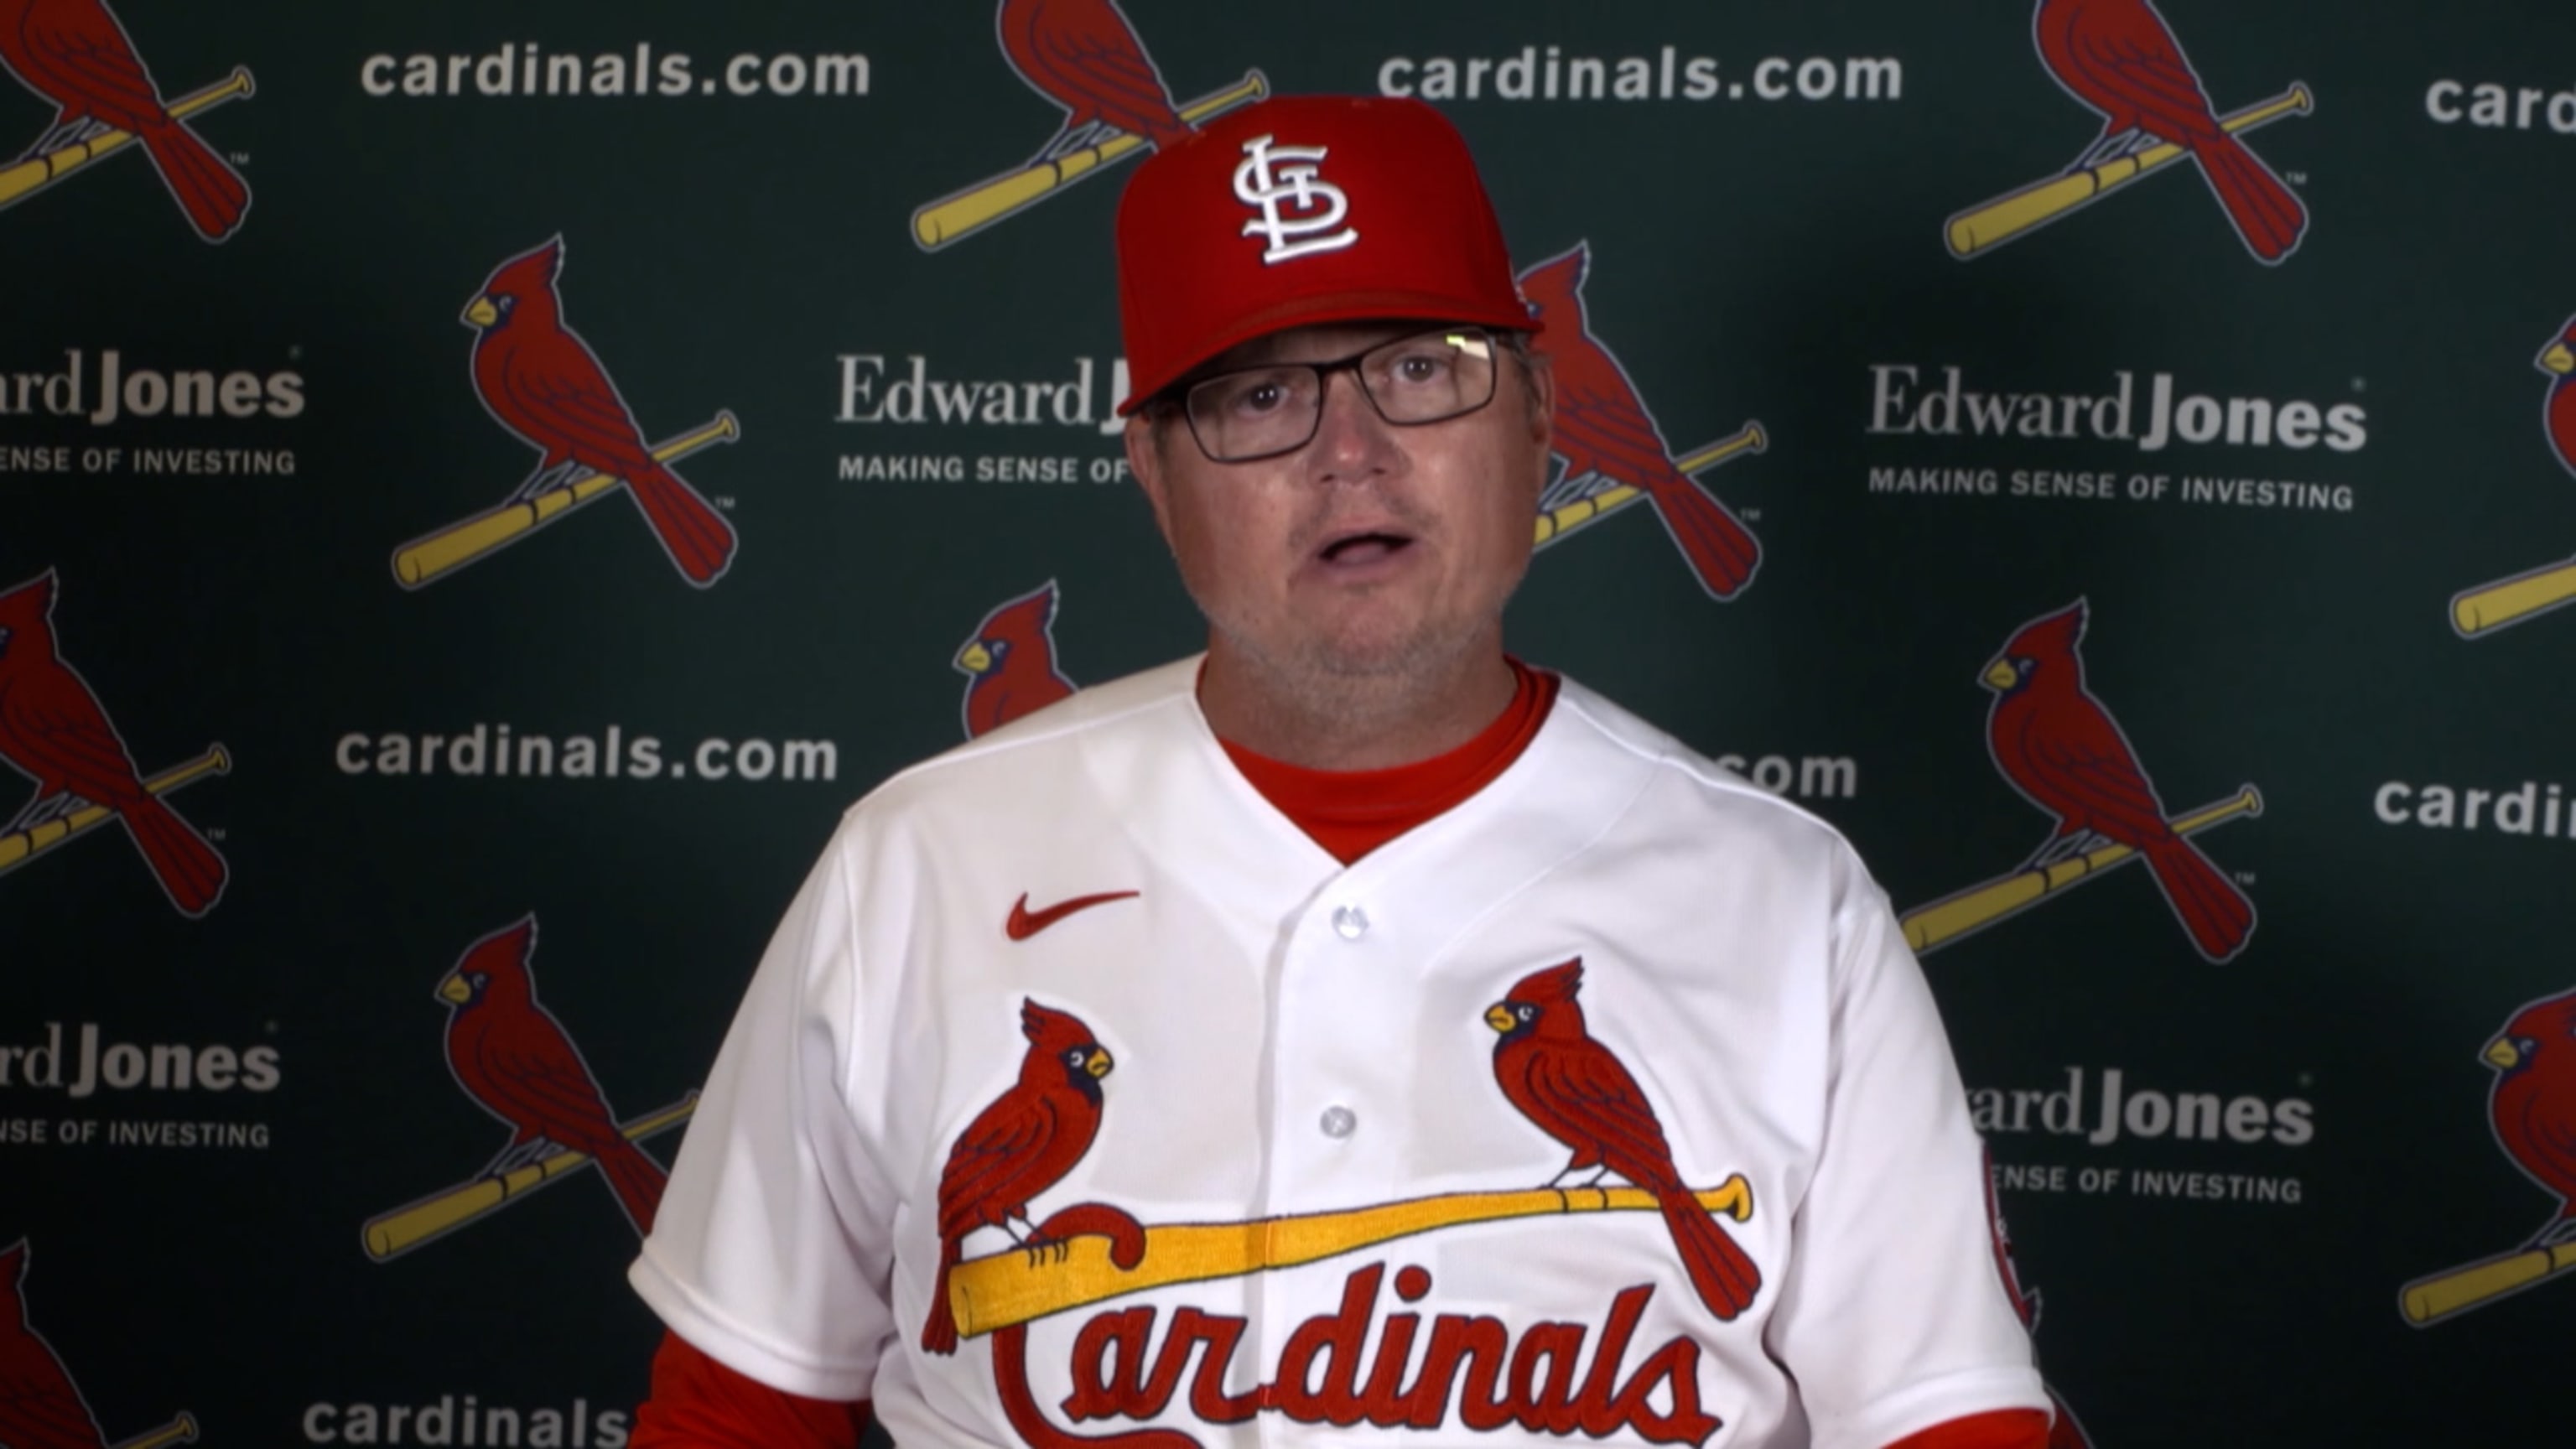 Pictures: Cardinals fans show up in style for the Home Opener